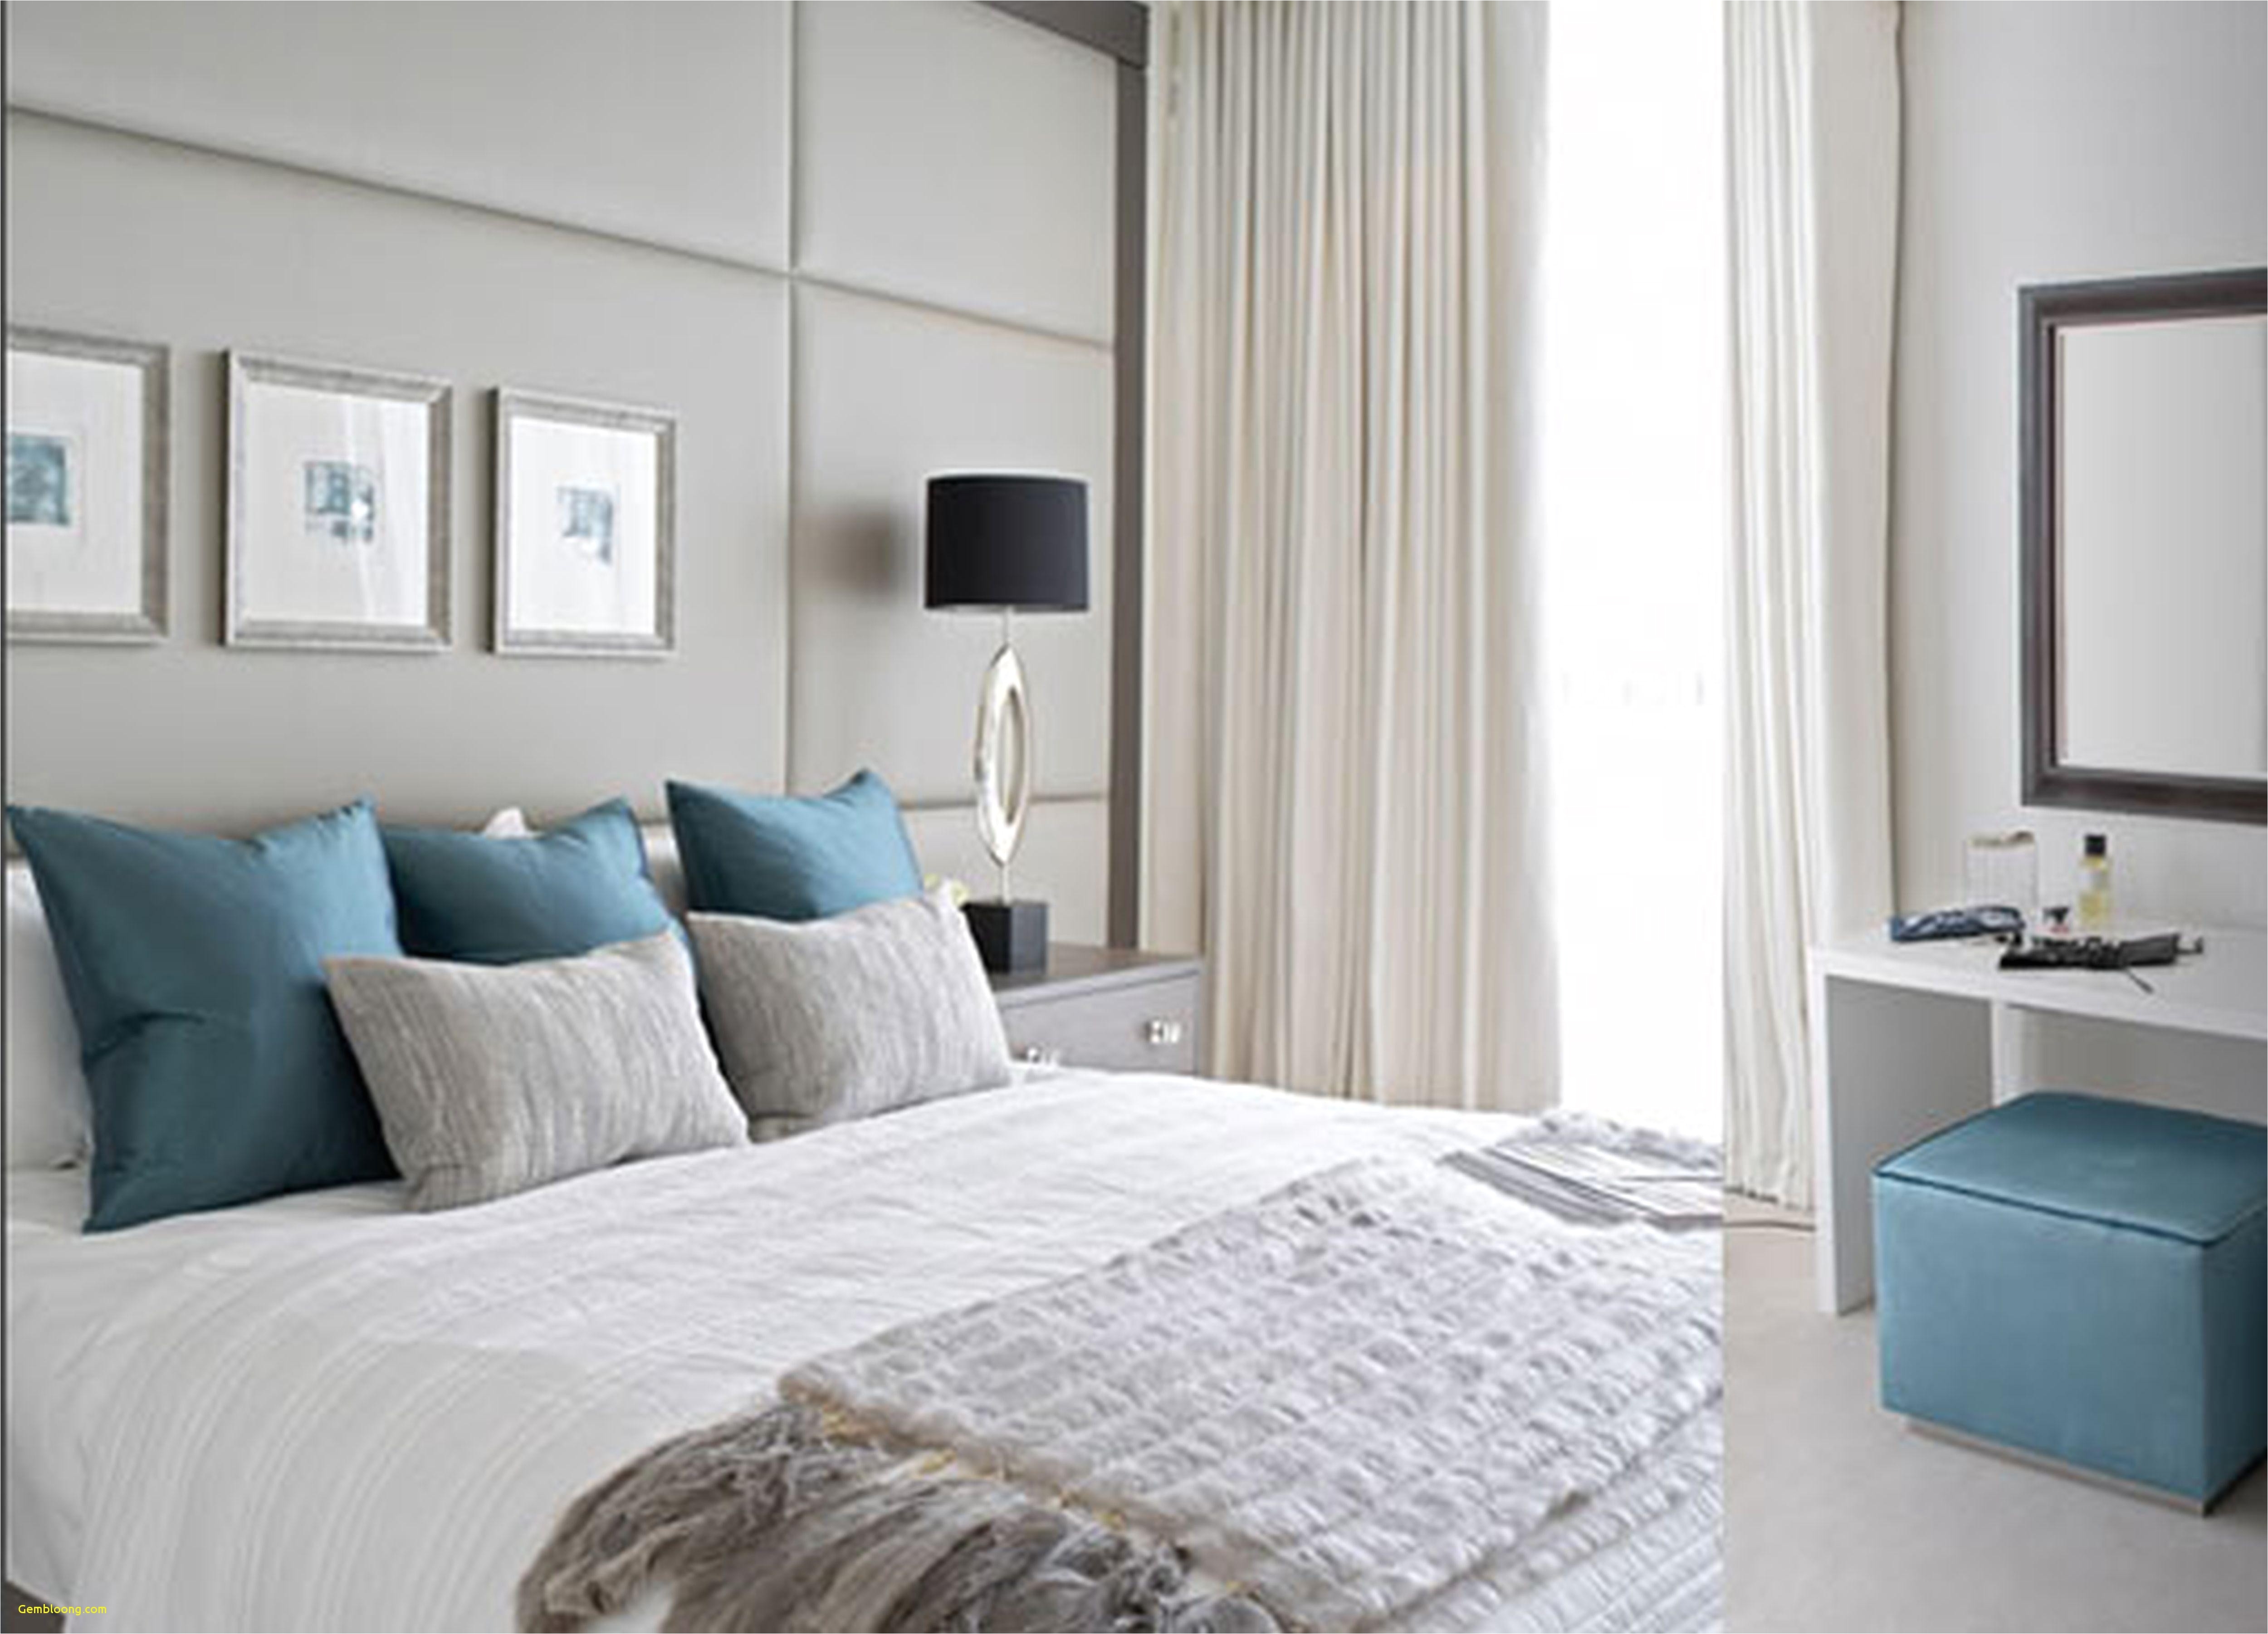 Bedroom 18 Bedroom With Blue Furniture Latest Bedroom Bedroom Setup Bedroom Setup 0d‚ Bedrooms